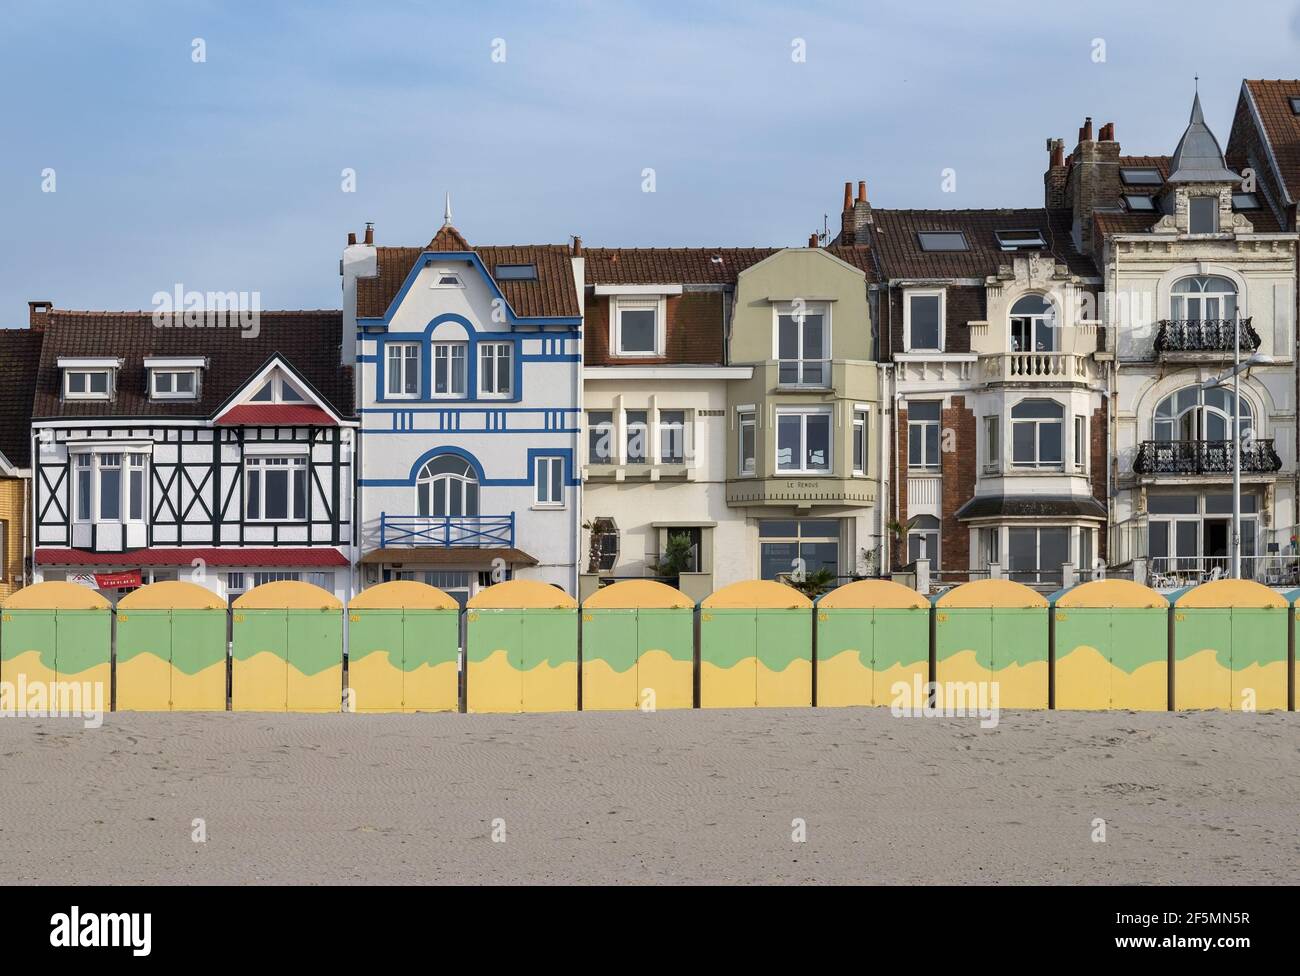 Dunkirk, France - 26 July 2020: Colorful beach huts in front of historic seaside buildings Stock Photo